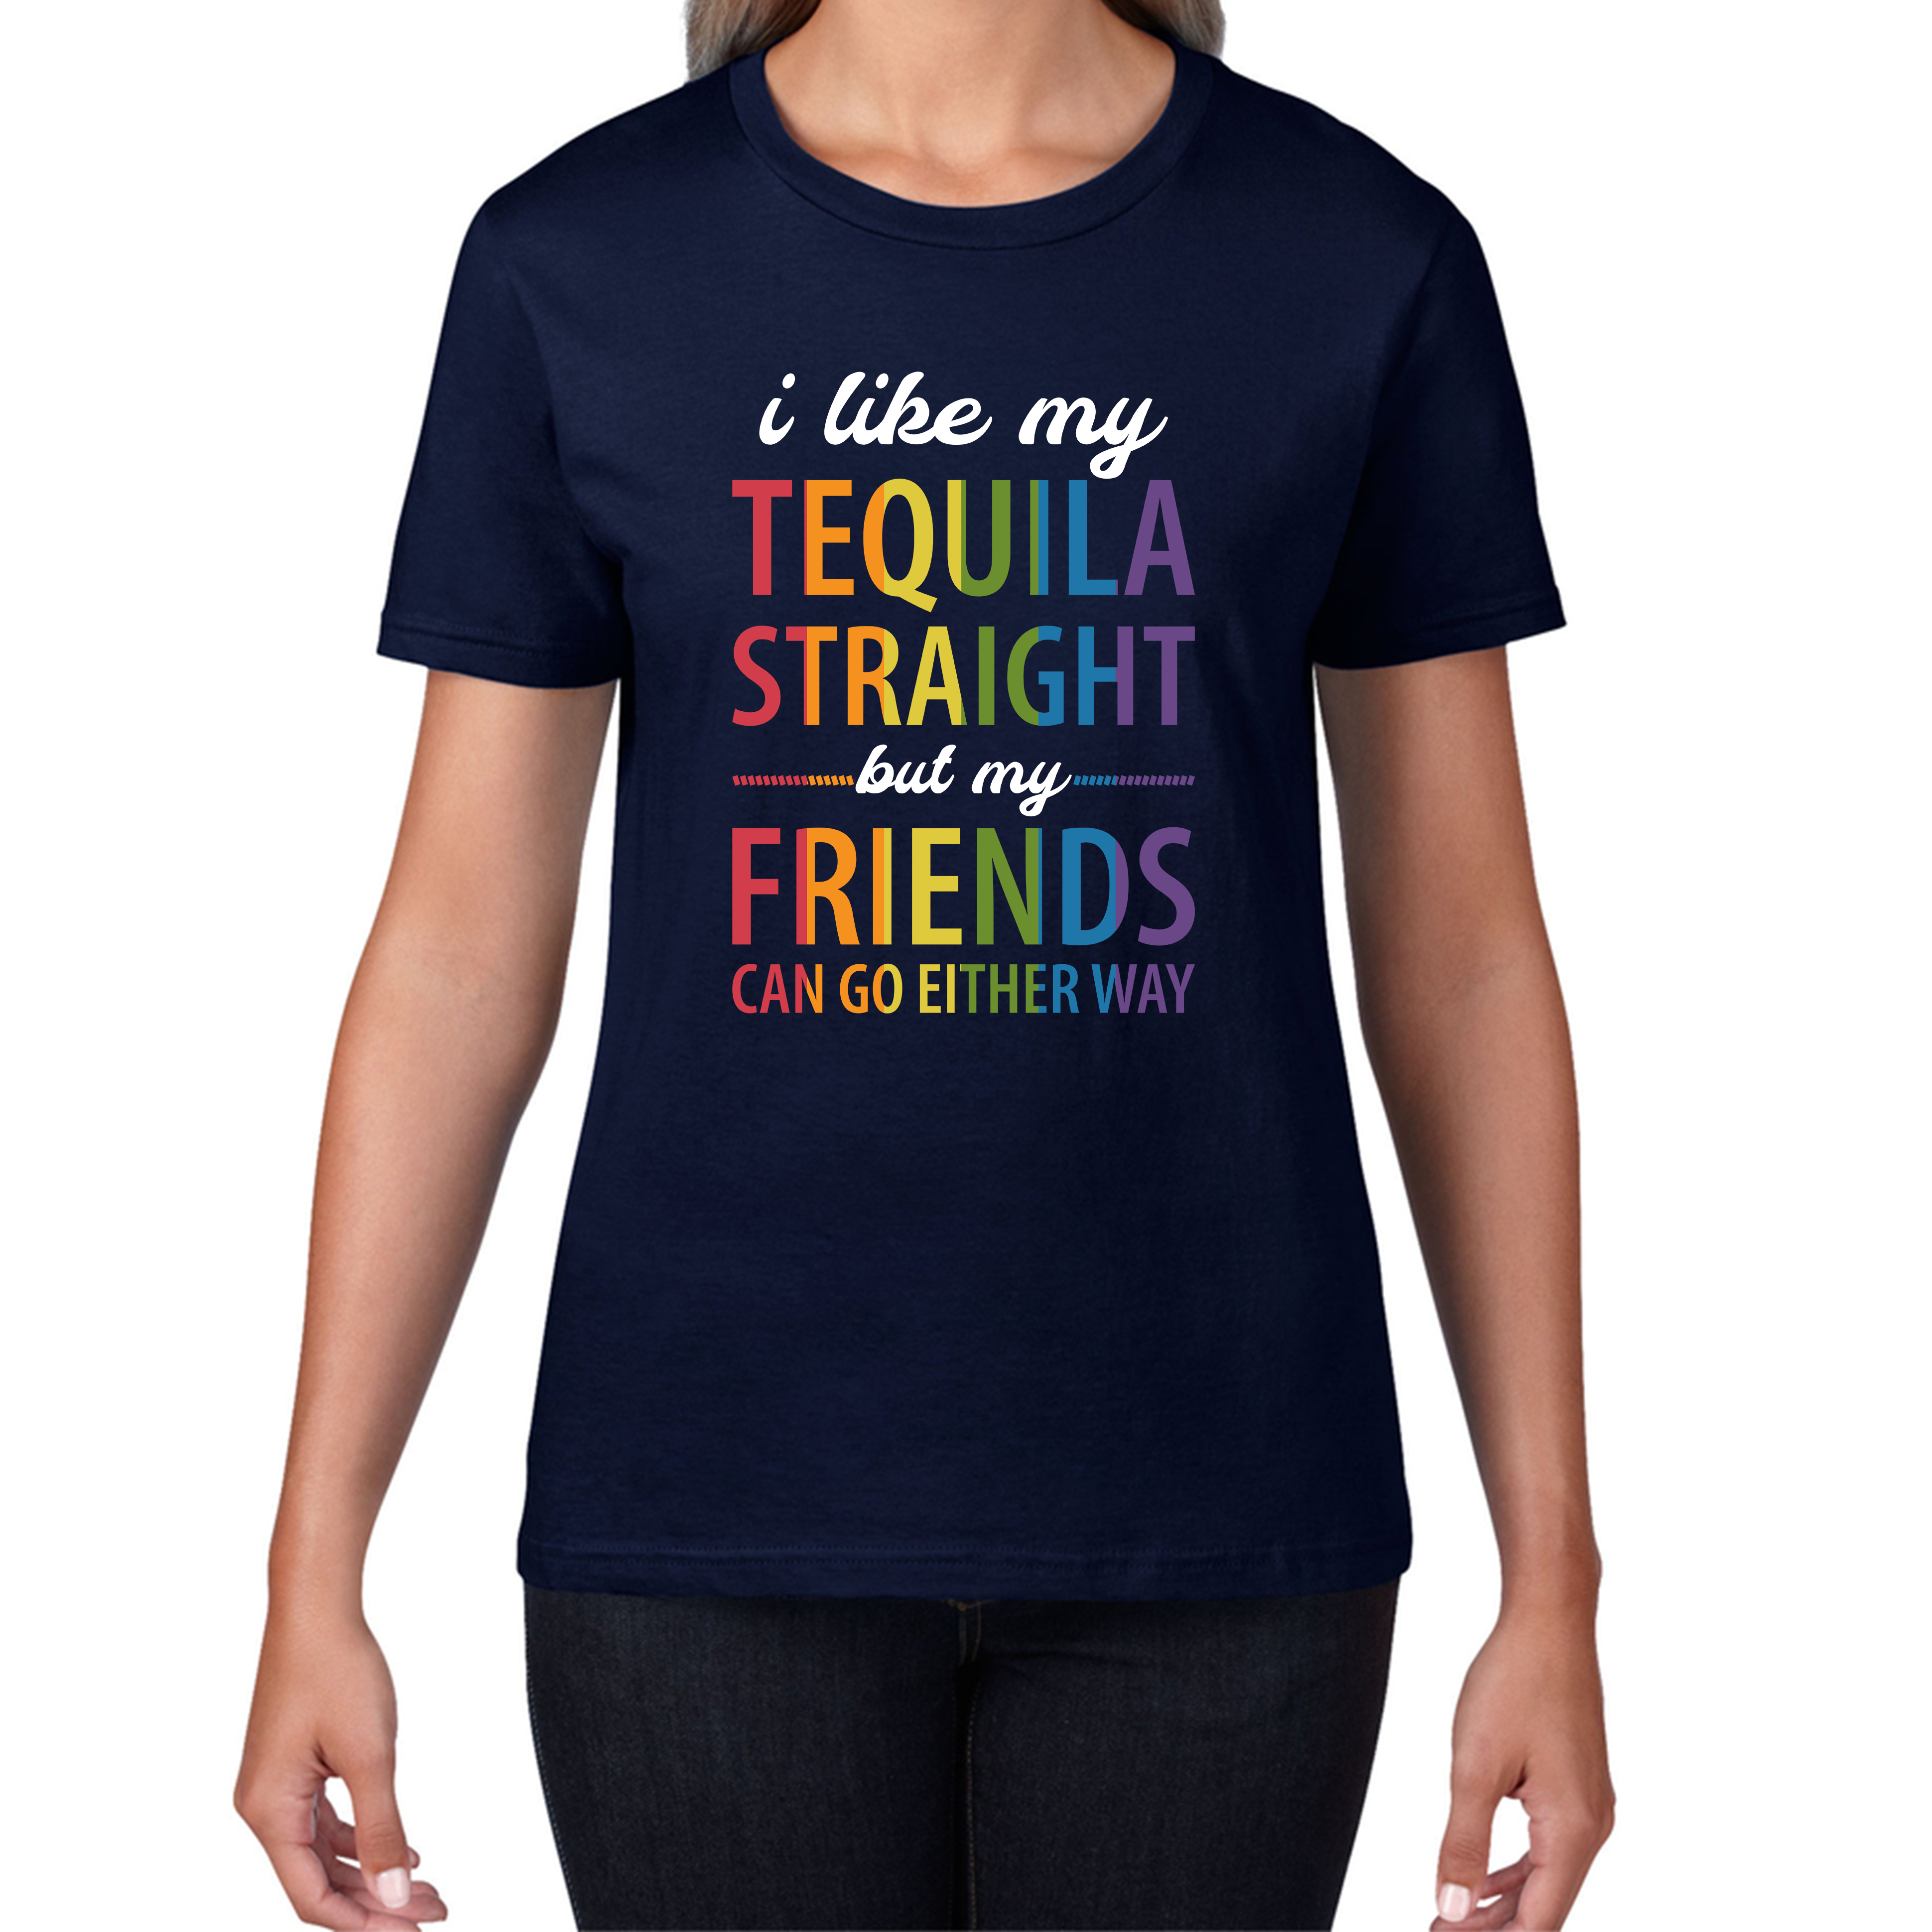 I Like My Tequila Straight But My Friends Can Go Either Way LGBTQ Pride Month Equality Pride Parade Womens Tee Top